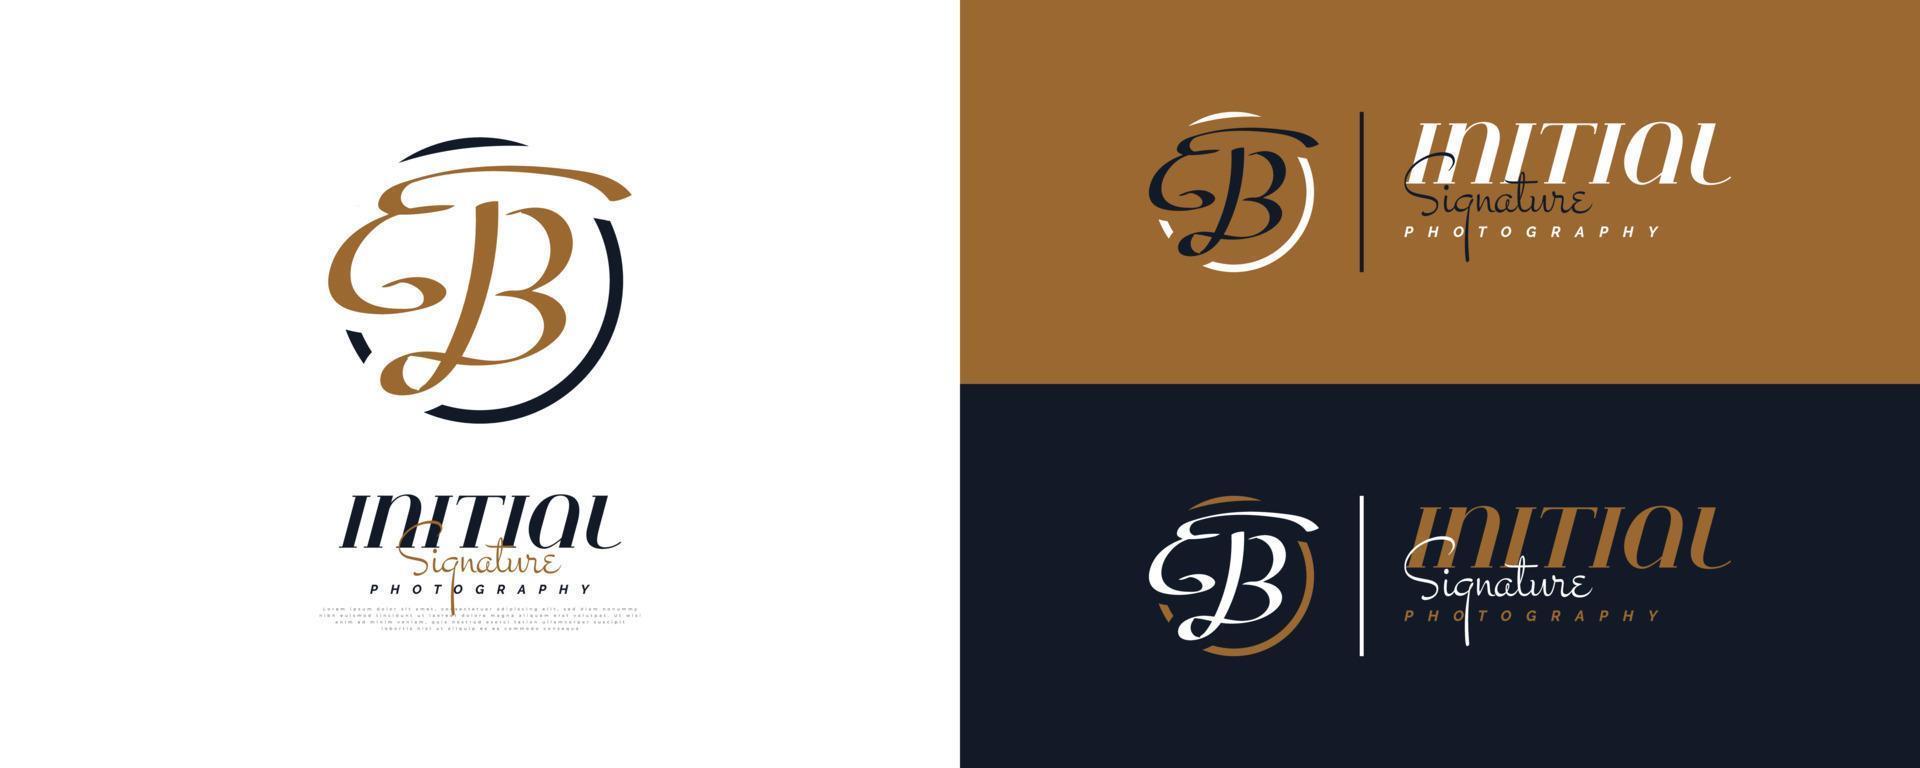 Initial E and B Logo Design in Elegant and Minimalist Handwriting Style. EB Signature Logo for Business Identity vector